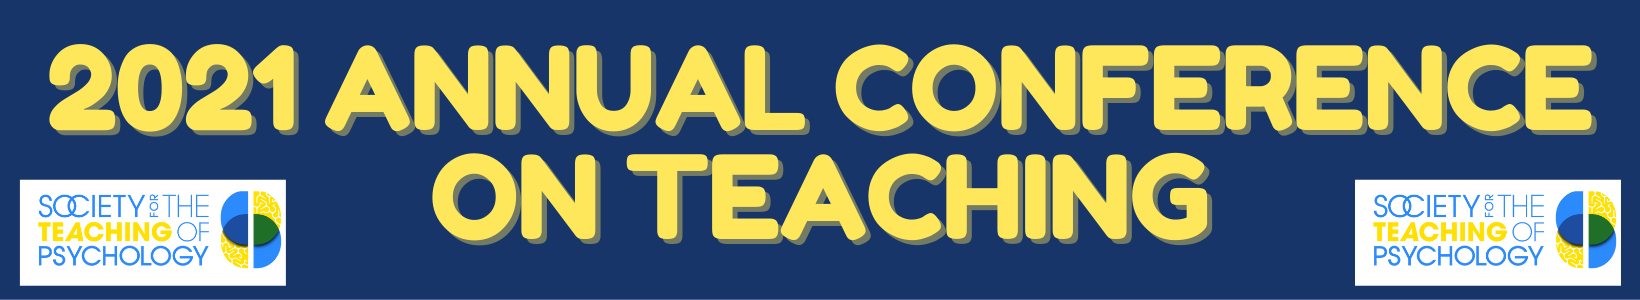 2021 Annual Conference on Teaching